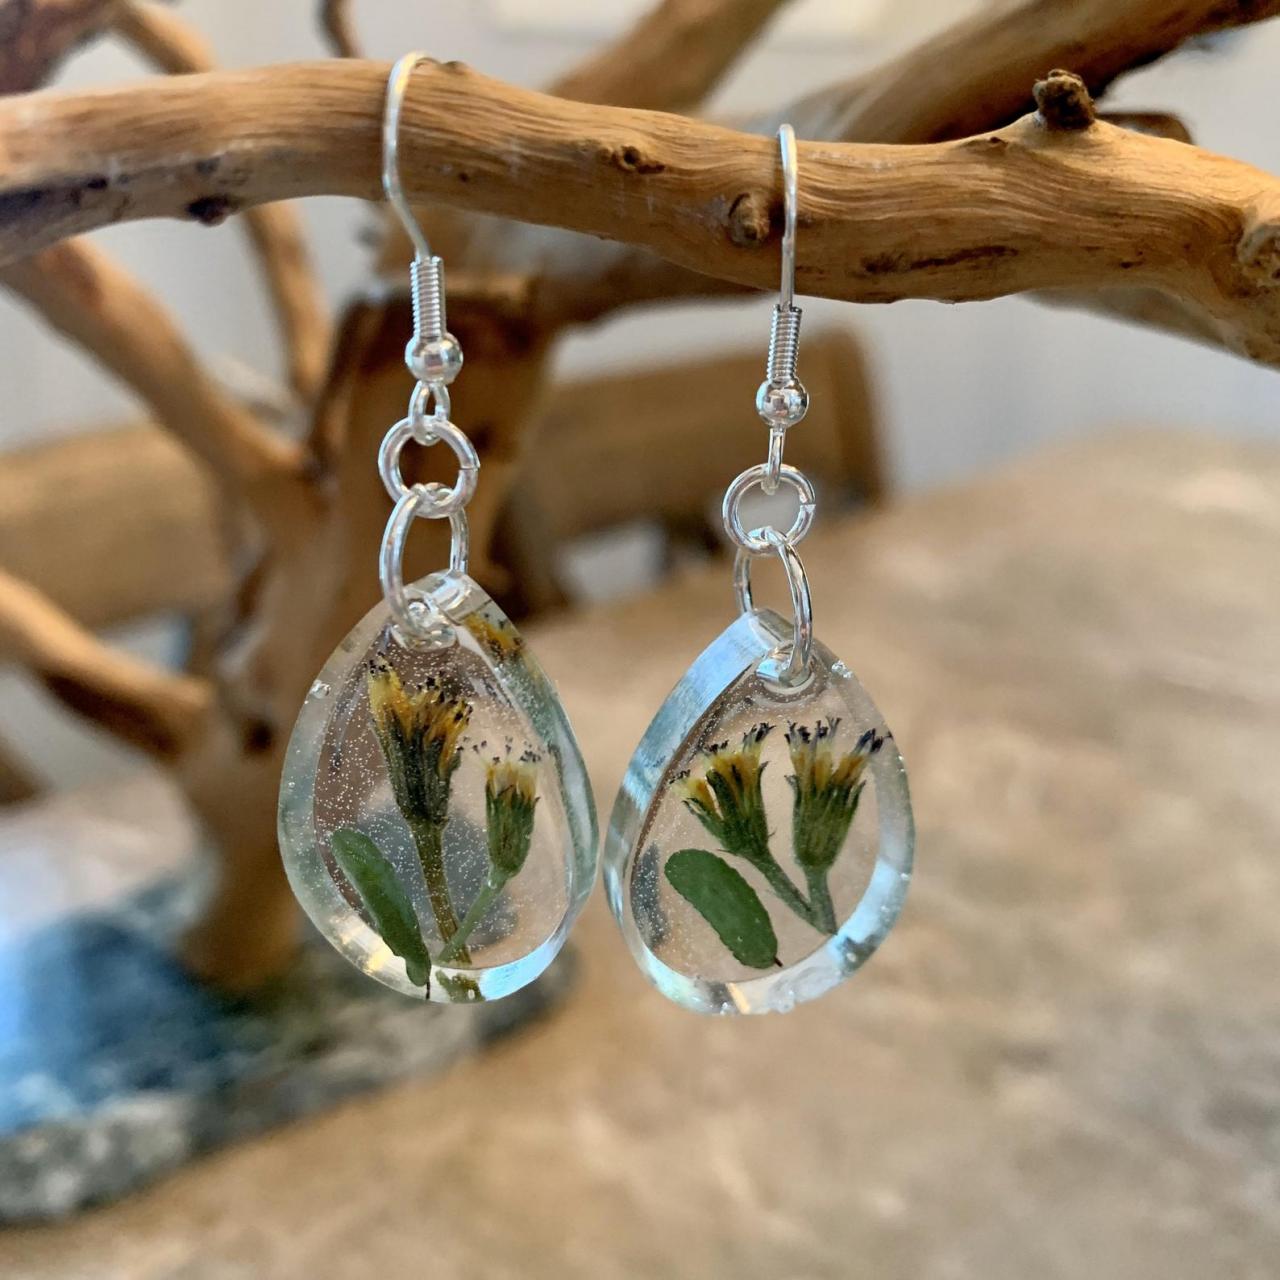 Pressed Dried Flowers Earrings, Resin Flower Jewelry, Unique Gift For Grad,preserved Flowers, Boho, Minimalist Jewelry Gifts, Nature Gift,